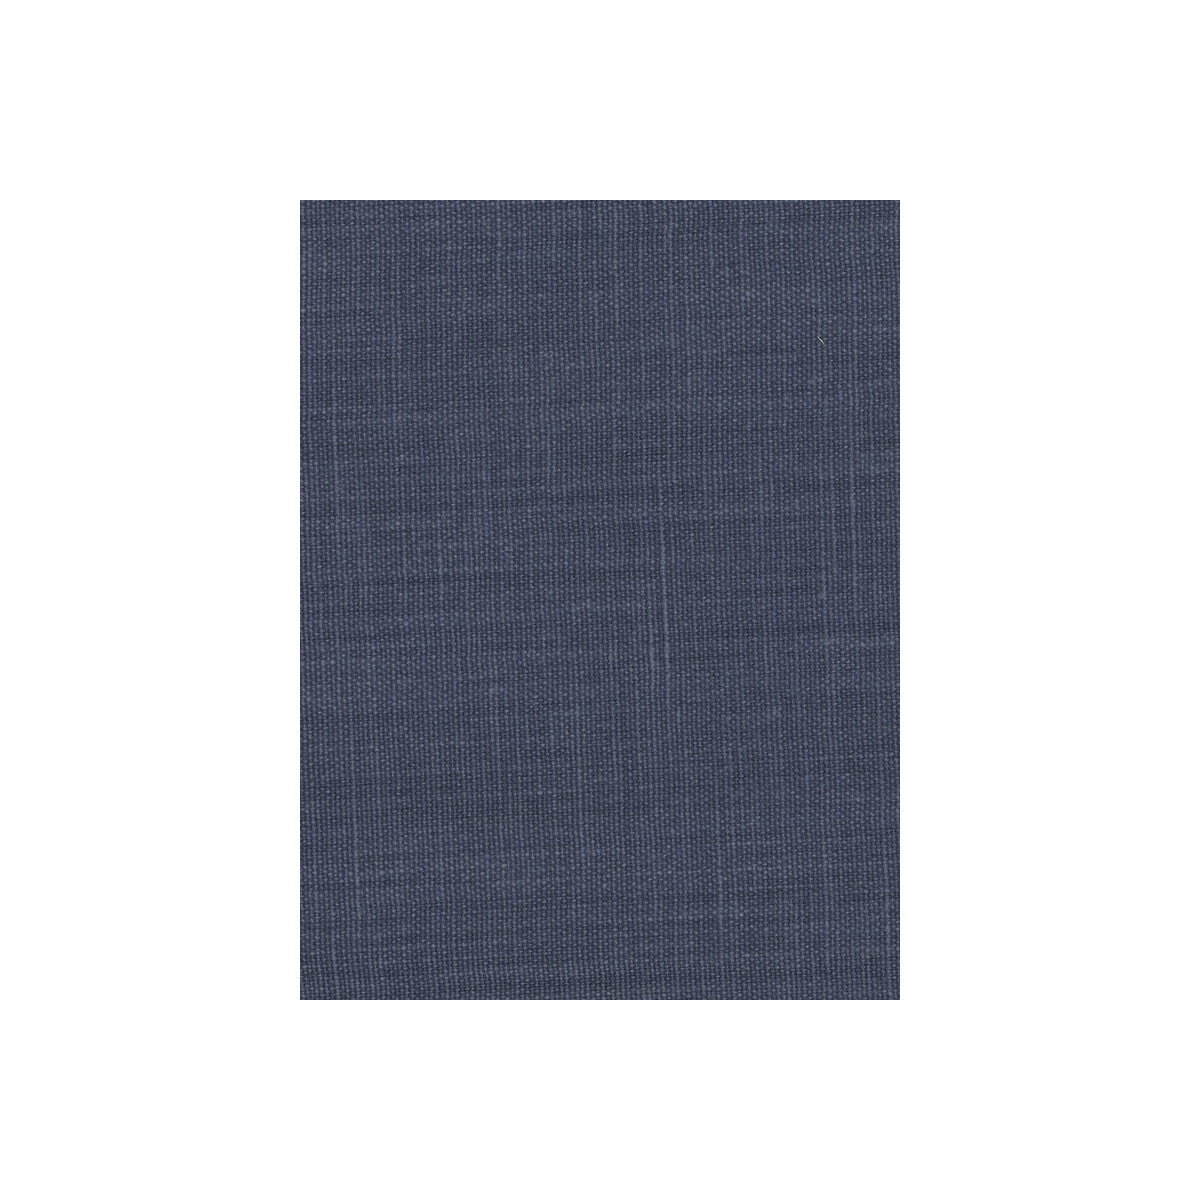 Onslow fabric in denim color - pattern AM100110.5.0 - by Kravet Couture in the Andrew Martin Mews collection